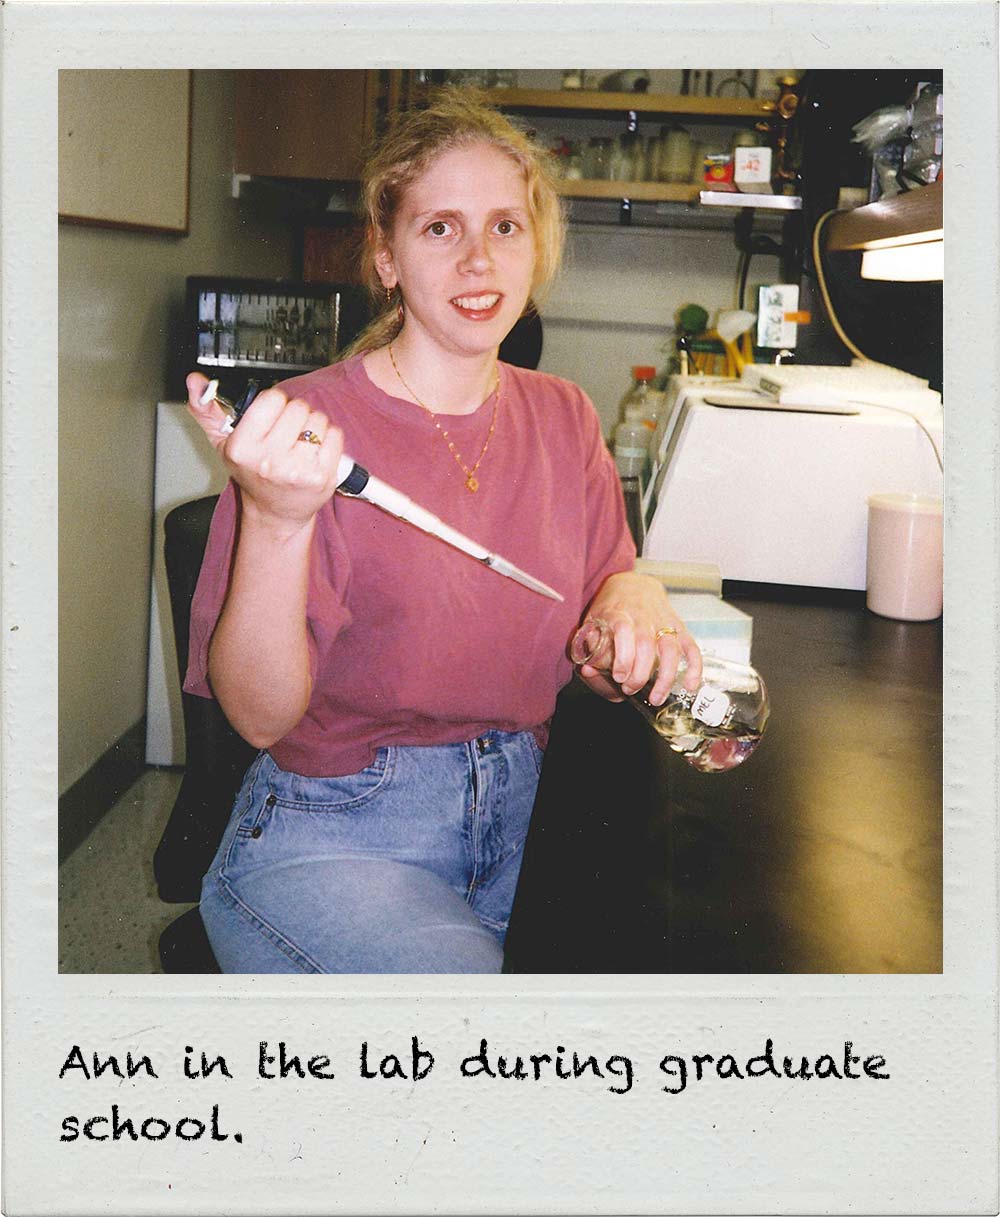 Ann in the lab during graduate school.